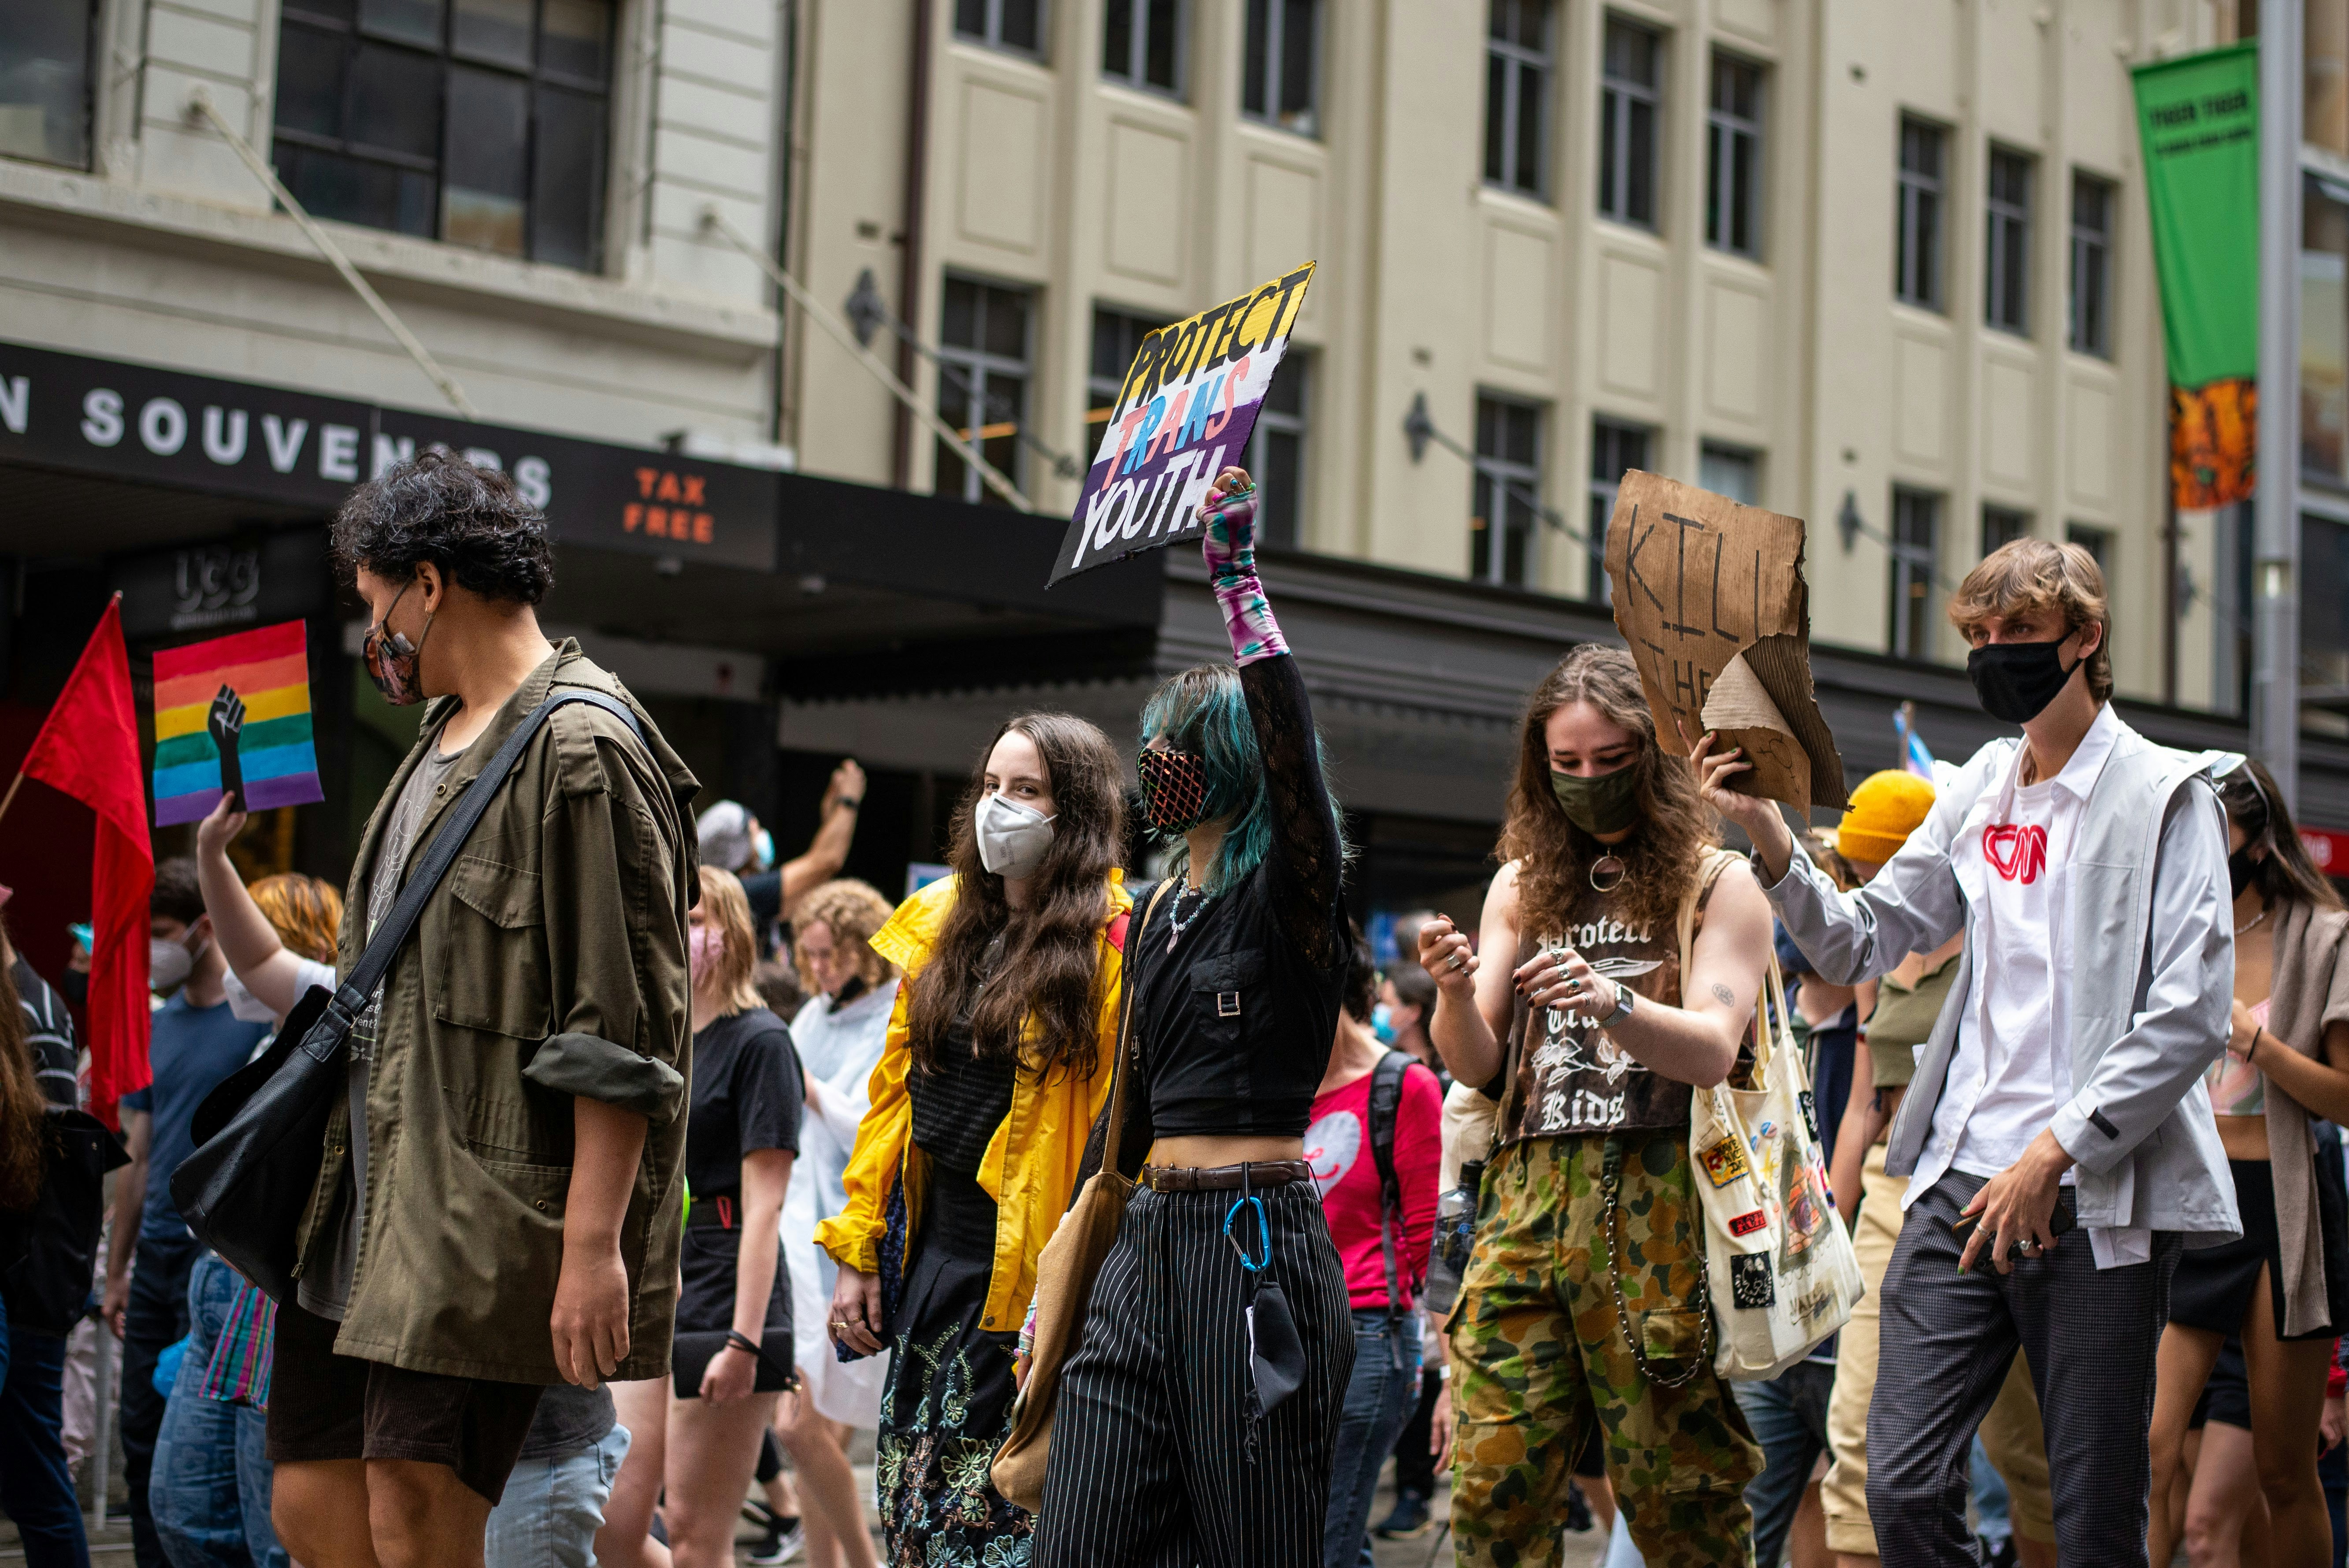 Protest of the Religious Discrimination Bill by LGBTQI+ Activists in Sydney, Australia (Feb 12, 2022)